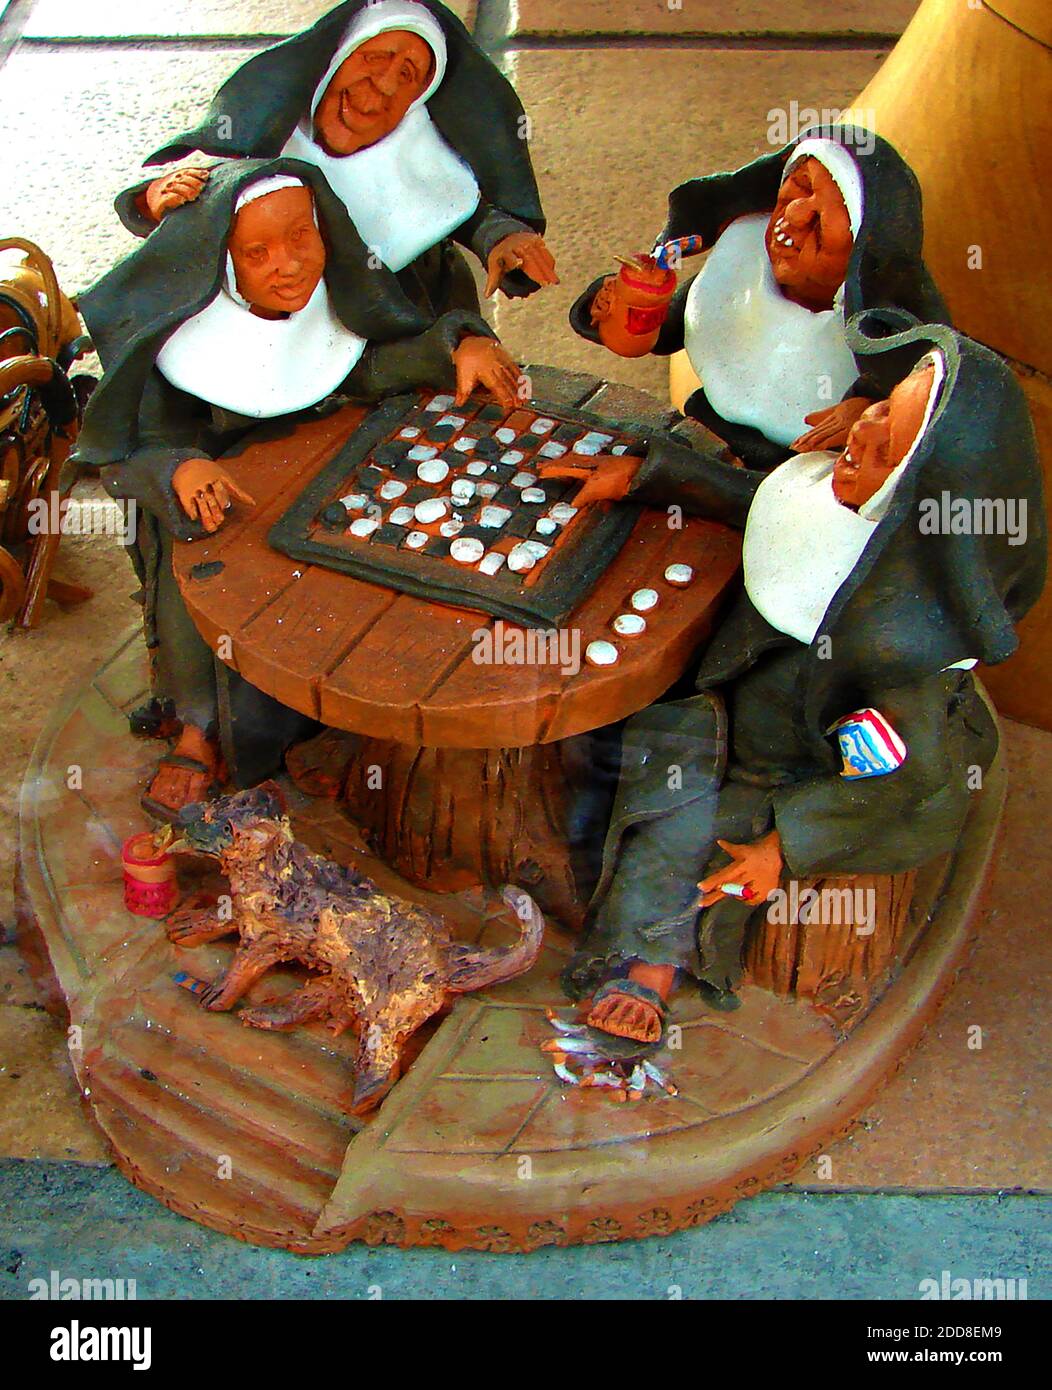 Madeira 2007 - Irreverent religious miniature hand made sculpture depicting a group of nuns playing draughts Stock Photo